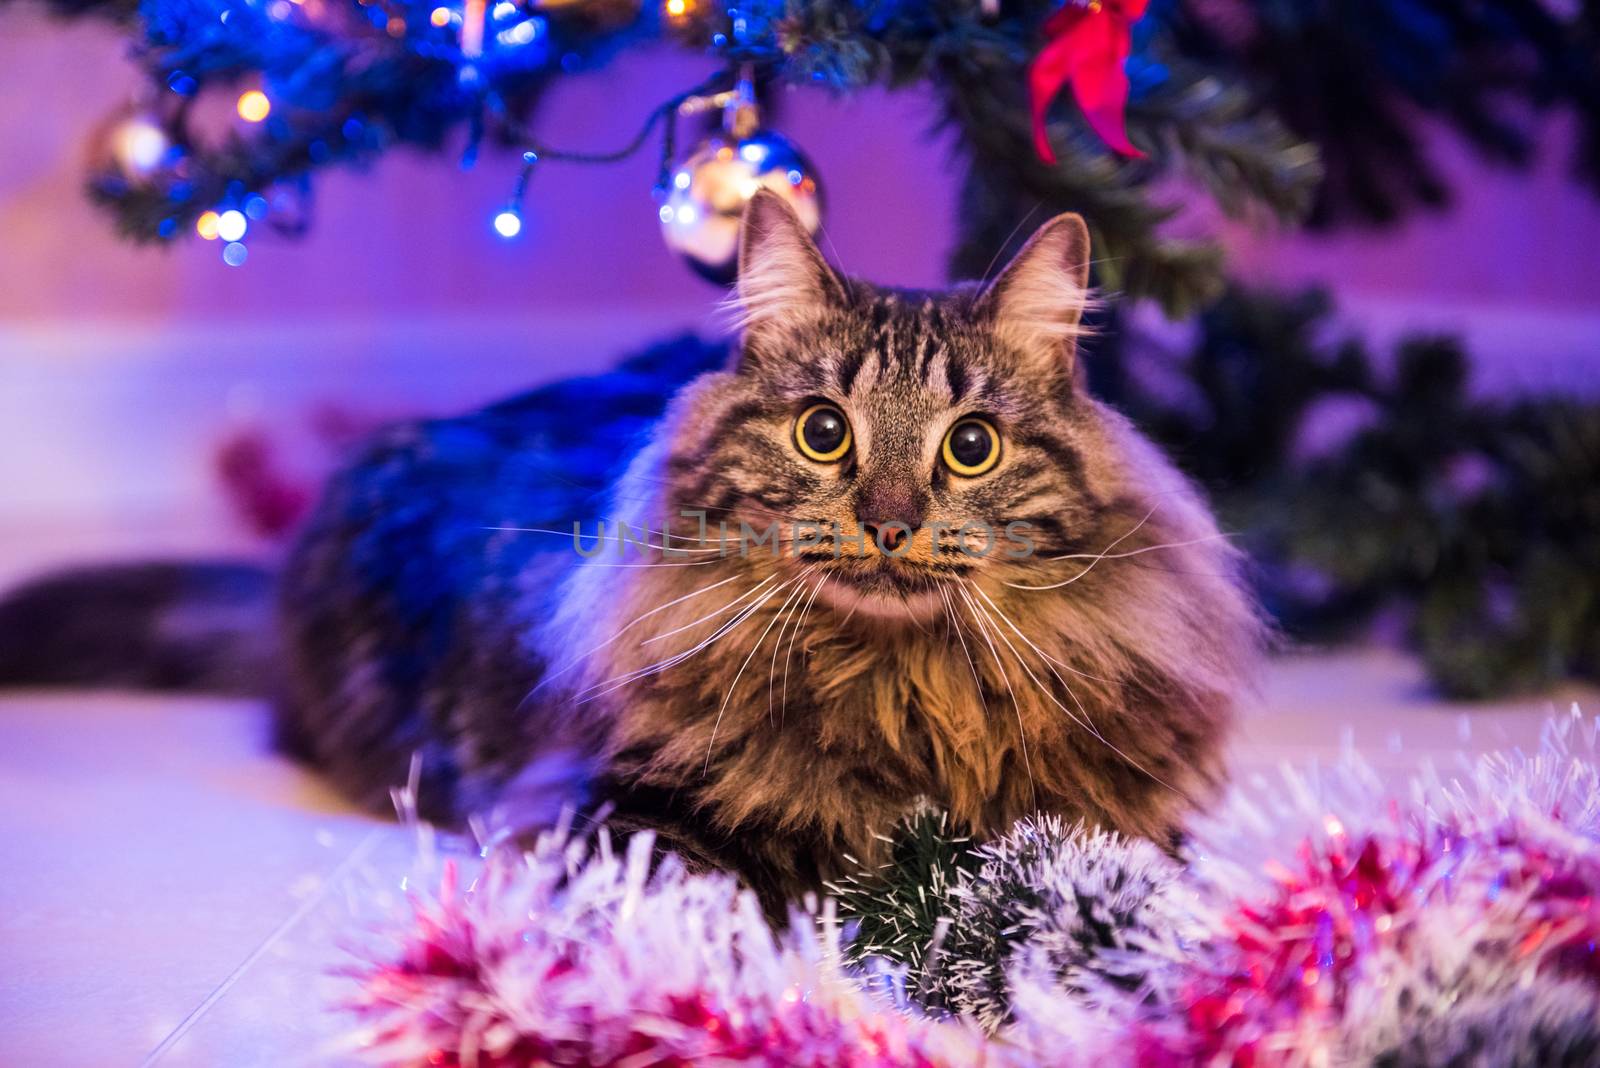 Norwegian cat under Christmas tree plays with Christmas tree toys by infinityyy